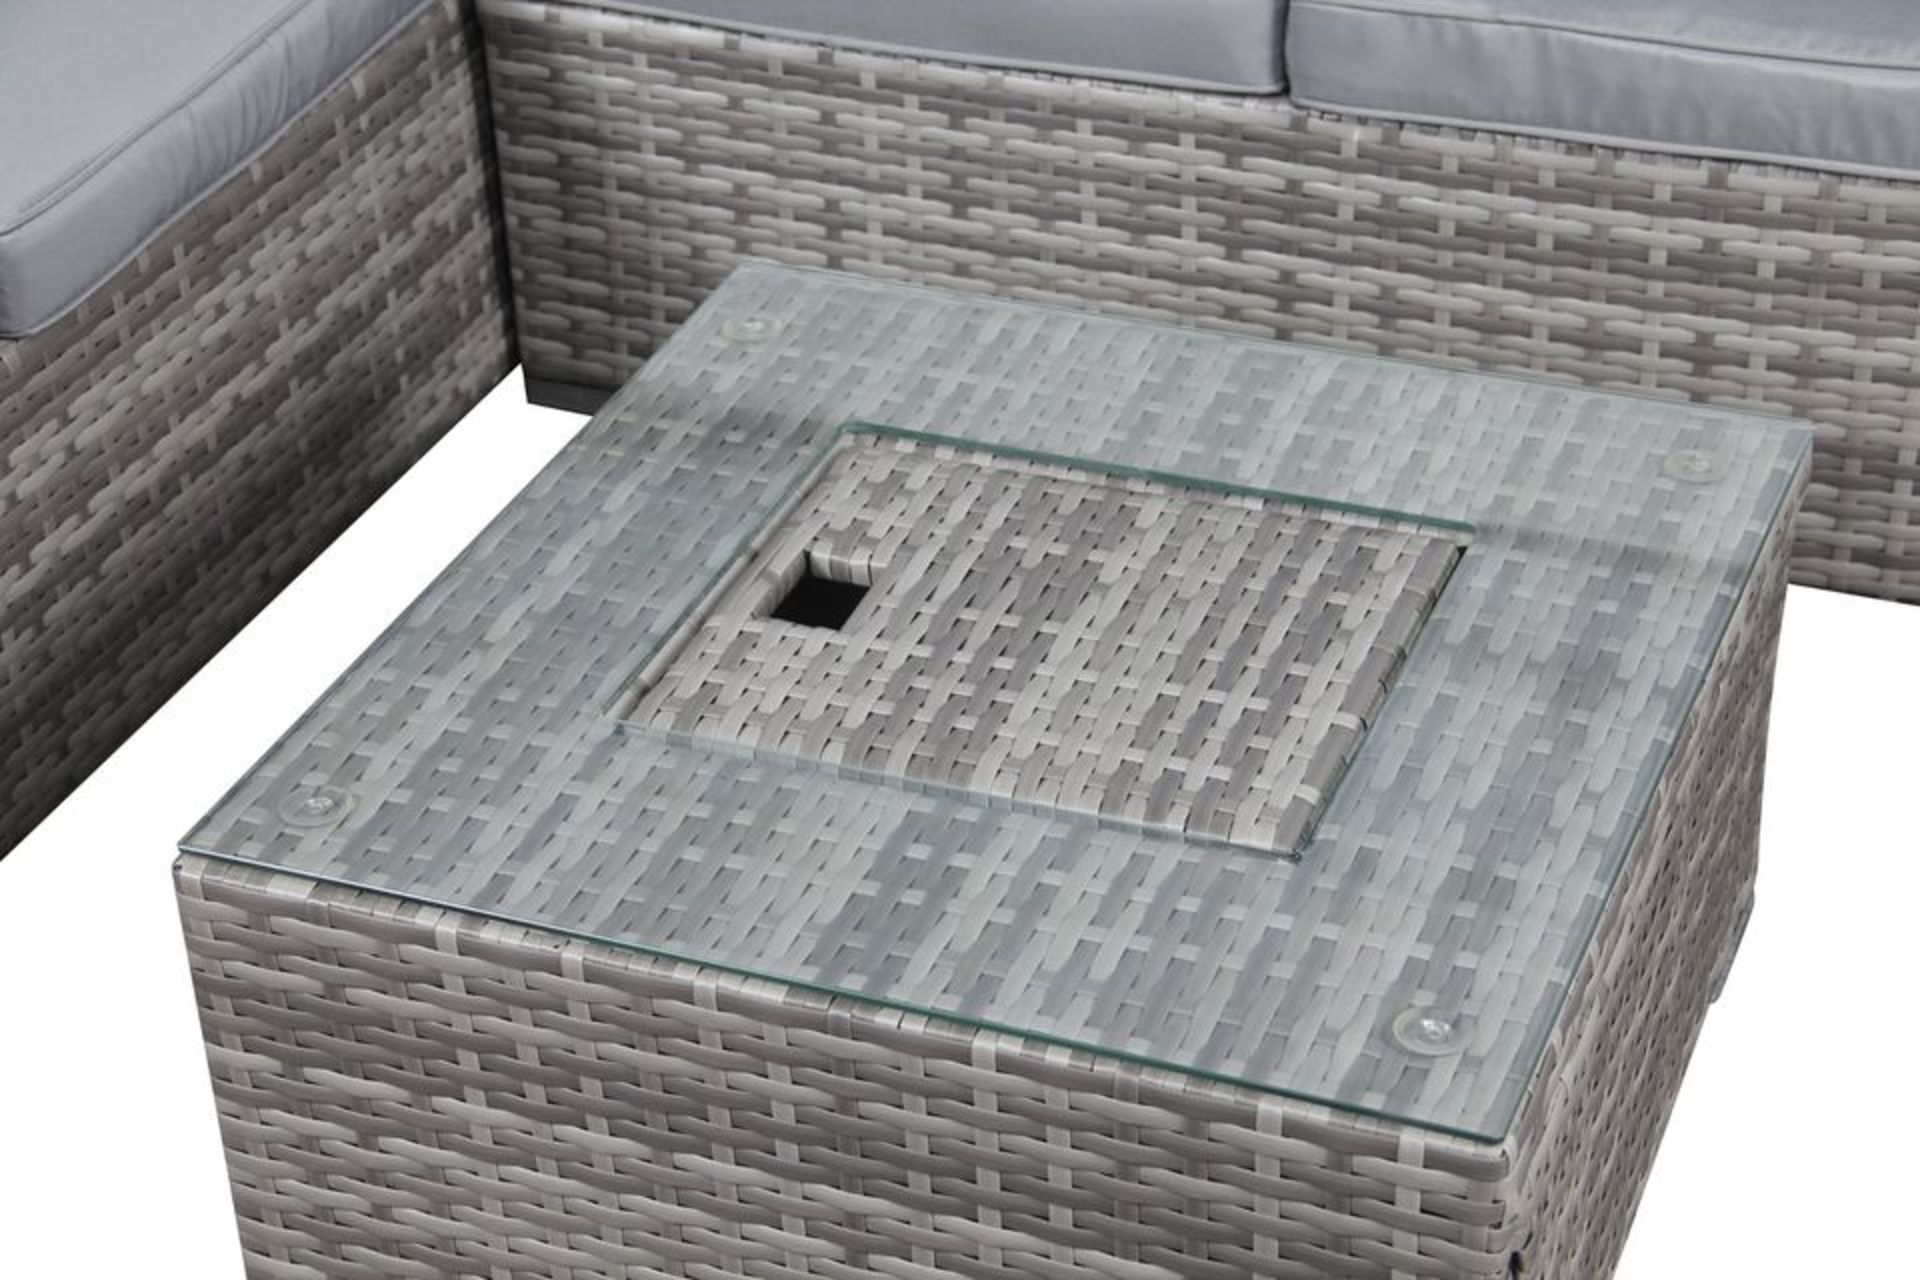 Brand new sets of garden furniture with ice storage box built into the table, RRP £999 *PLUS VAT* - Image 4 of 6